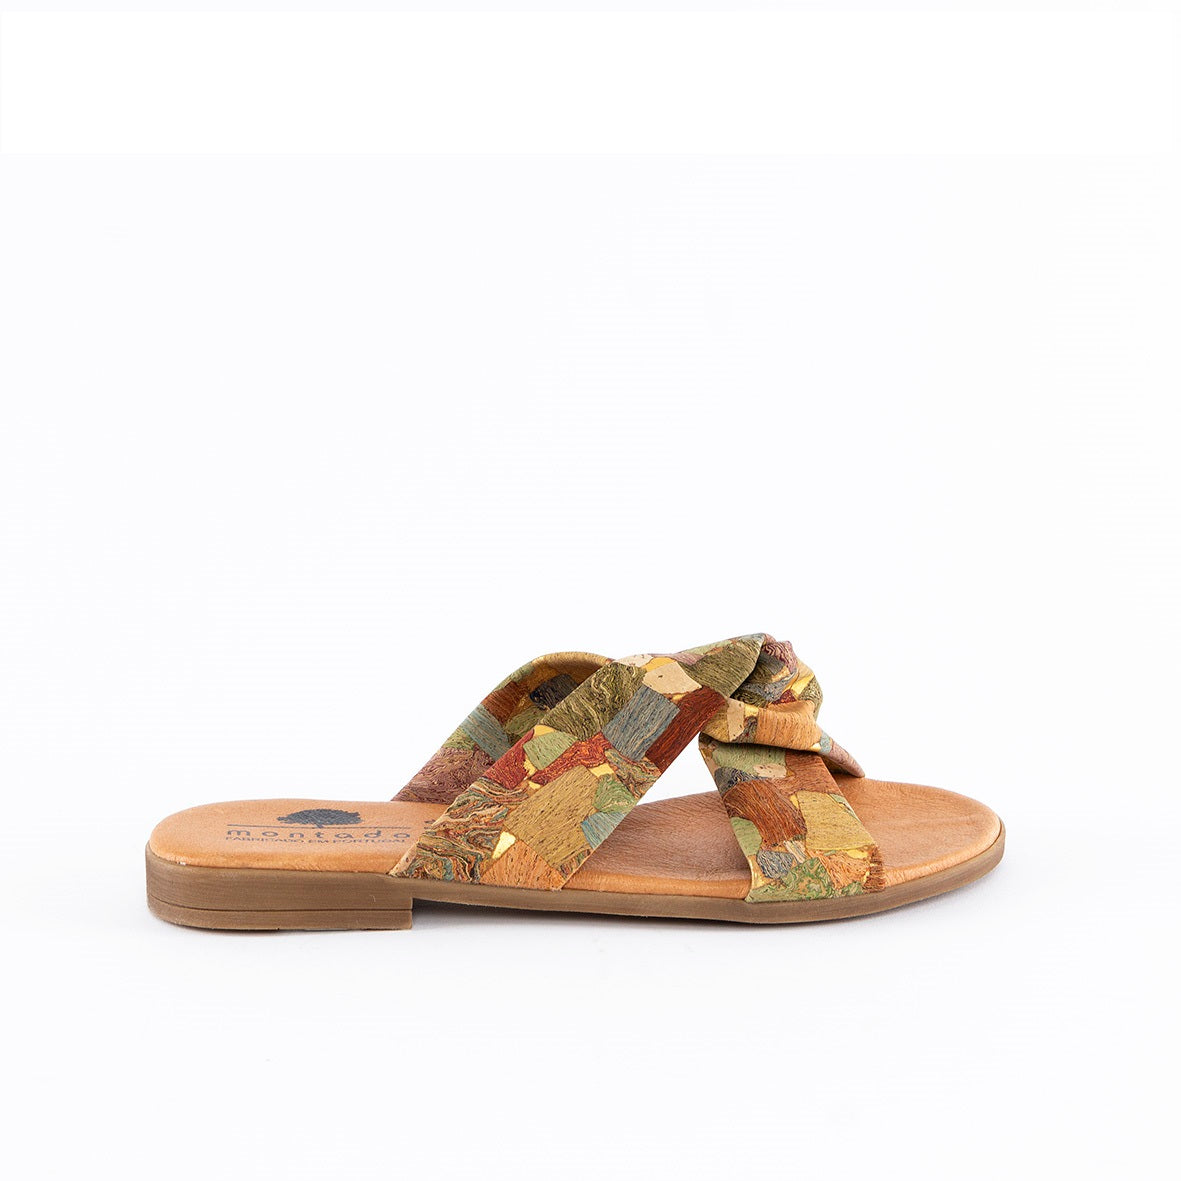 Cork Sandals Bow | Cork Shoes | Handmade in Portugal